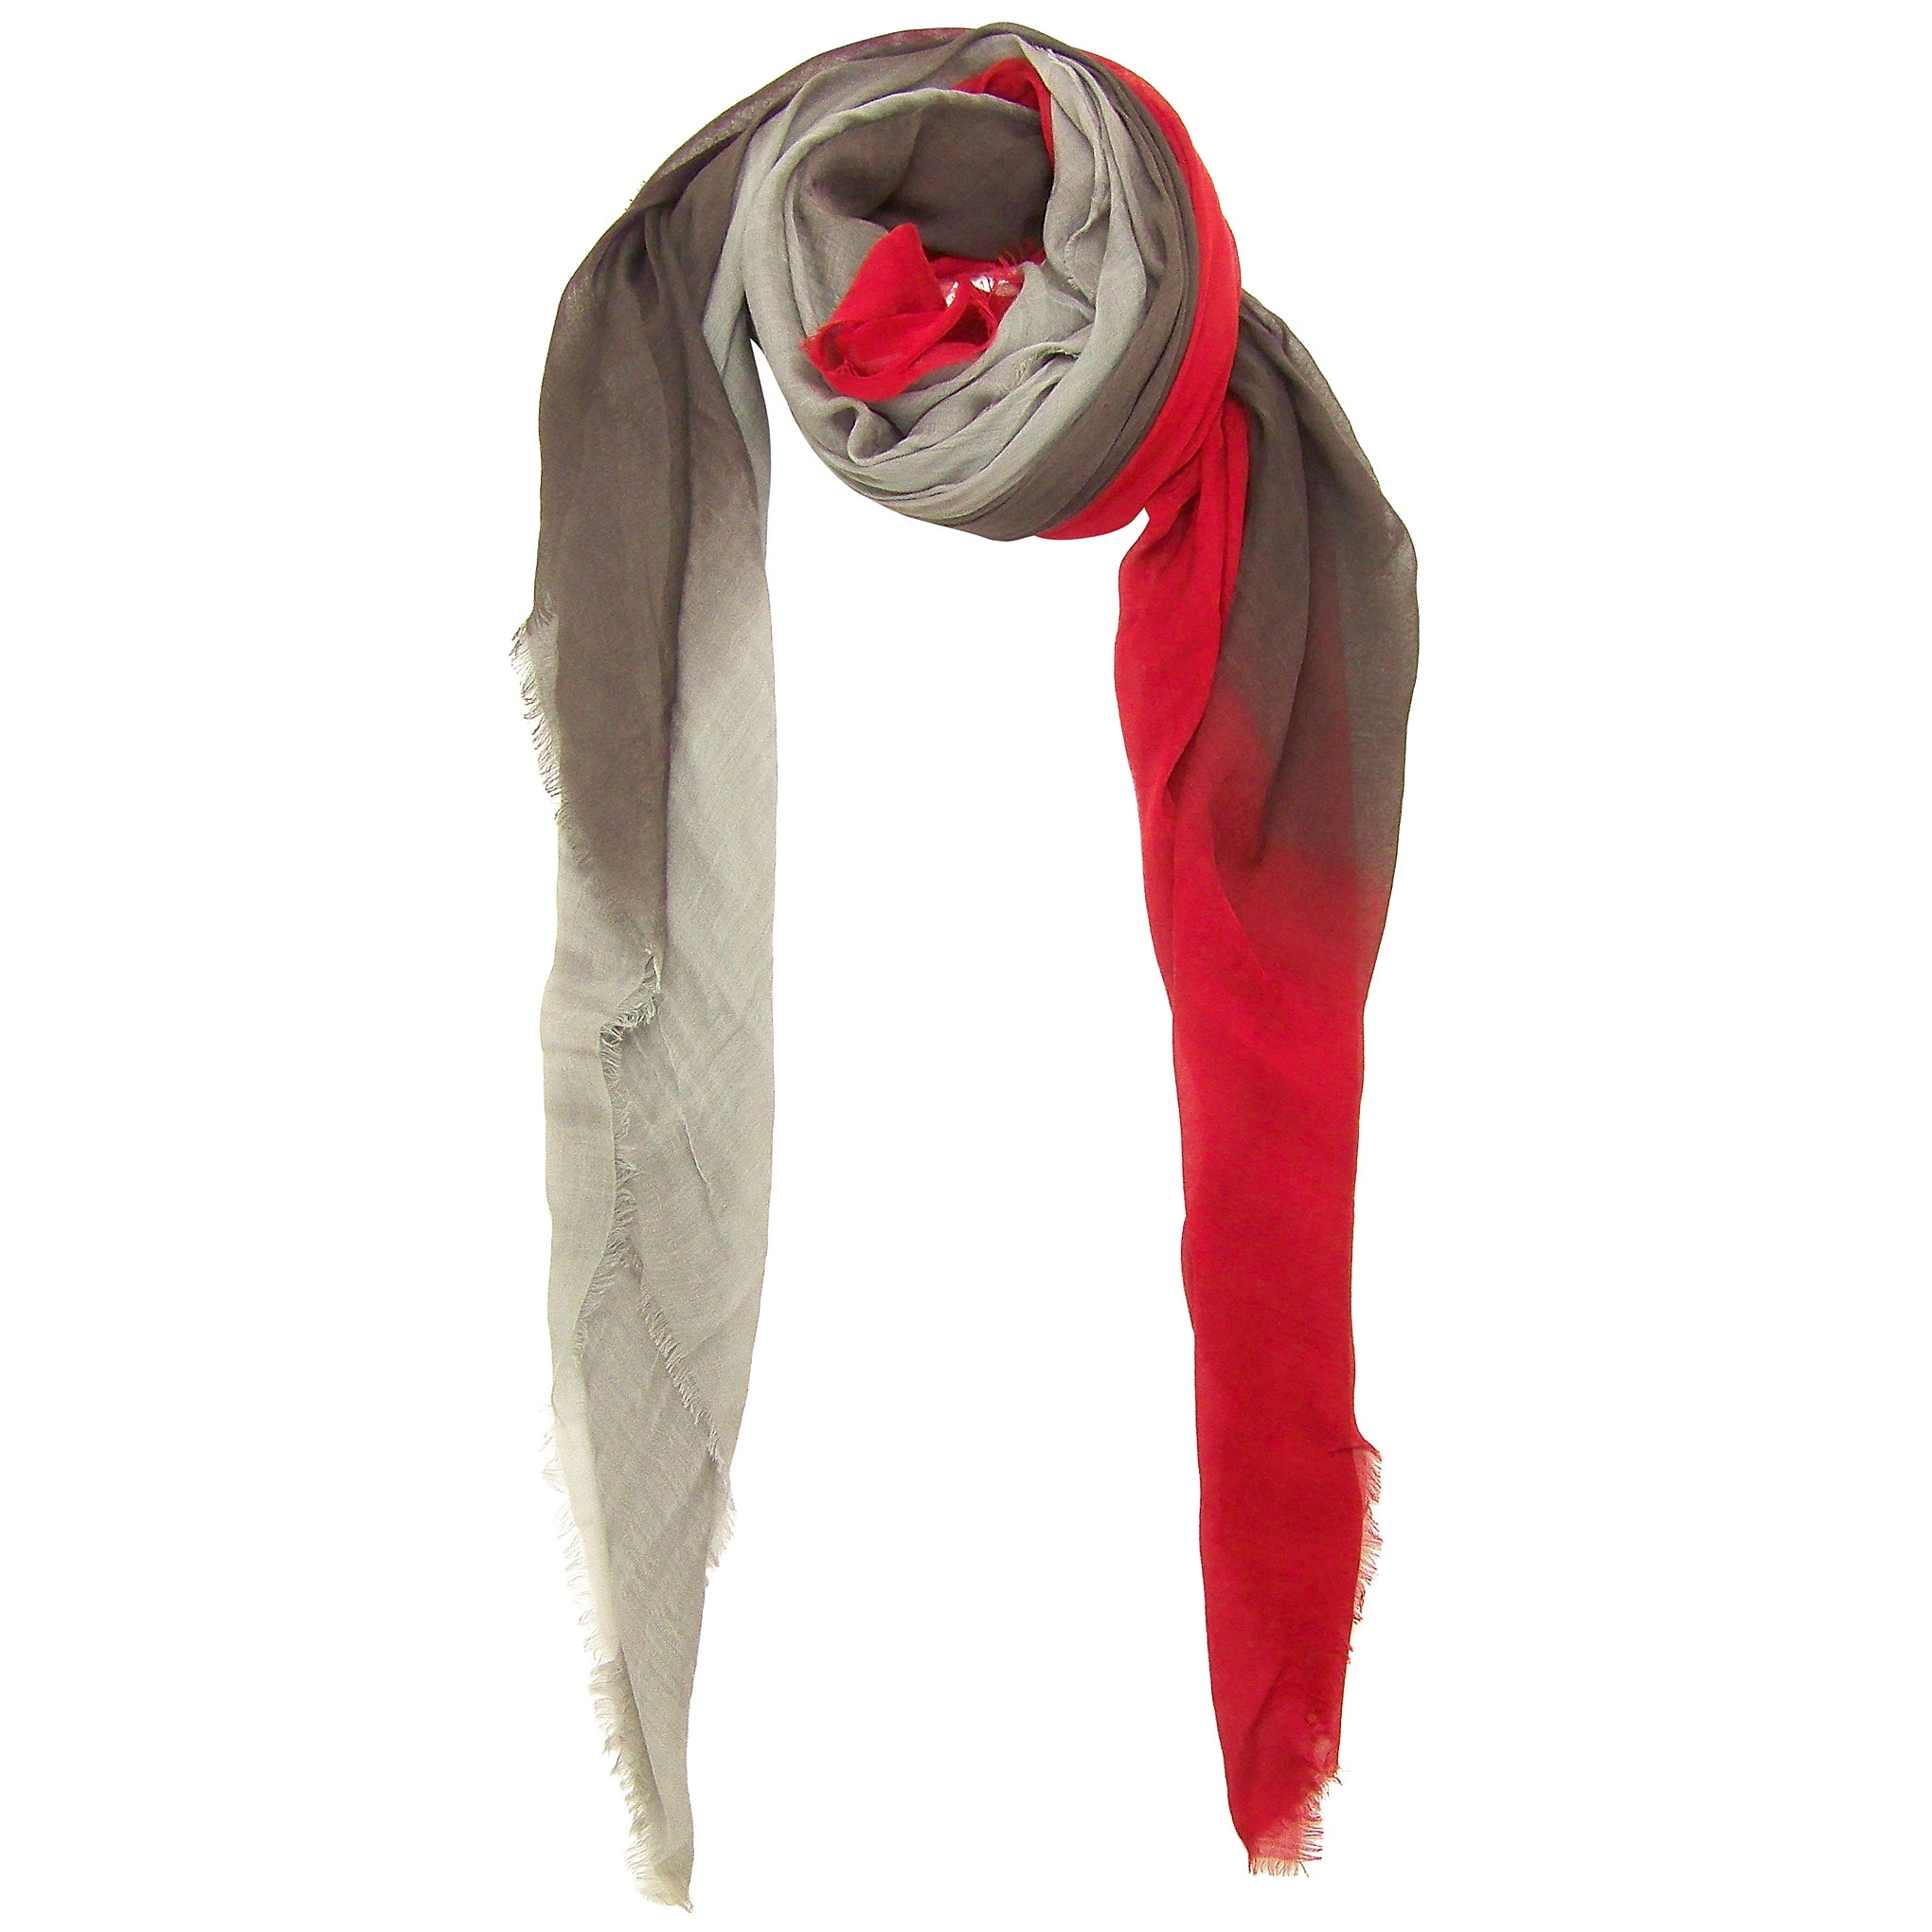 Blue Pacific Dream Cashmere and Silk Scarf in Red Pear Taupe 47 x 37